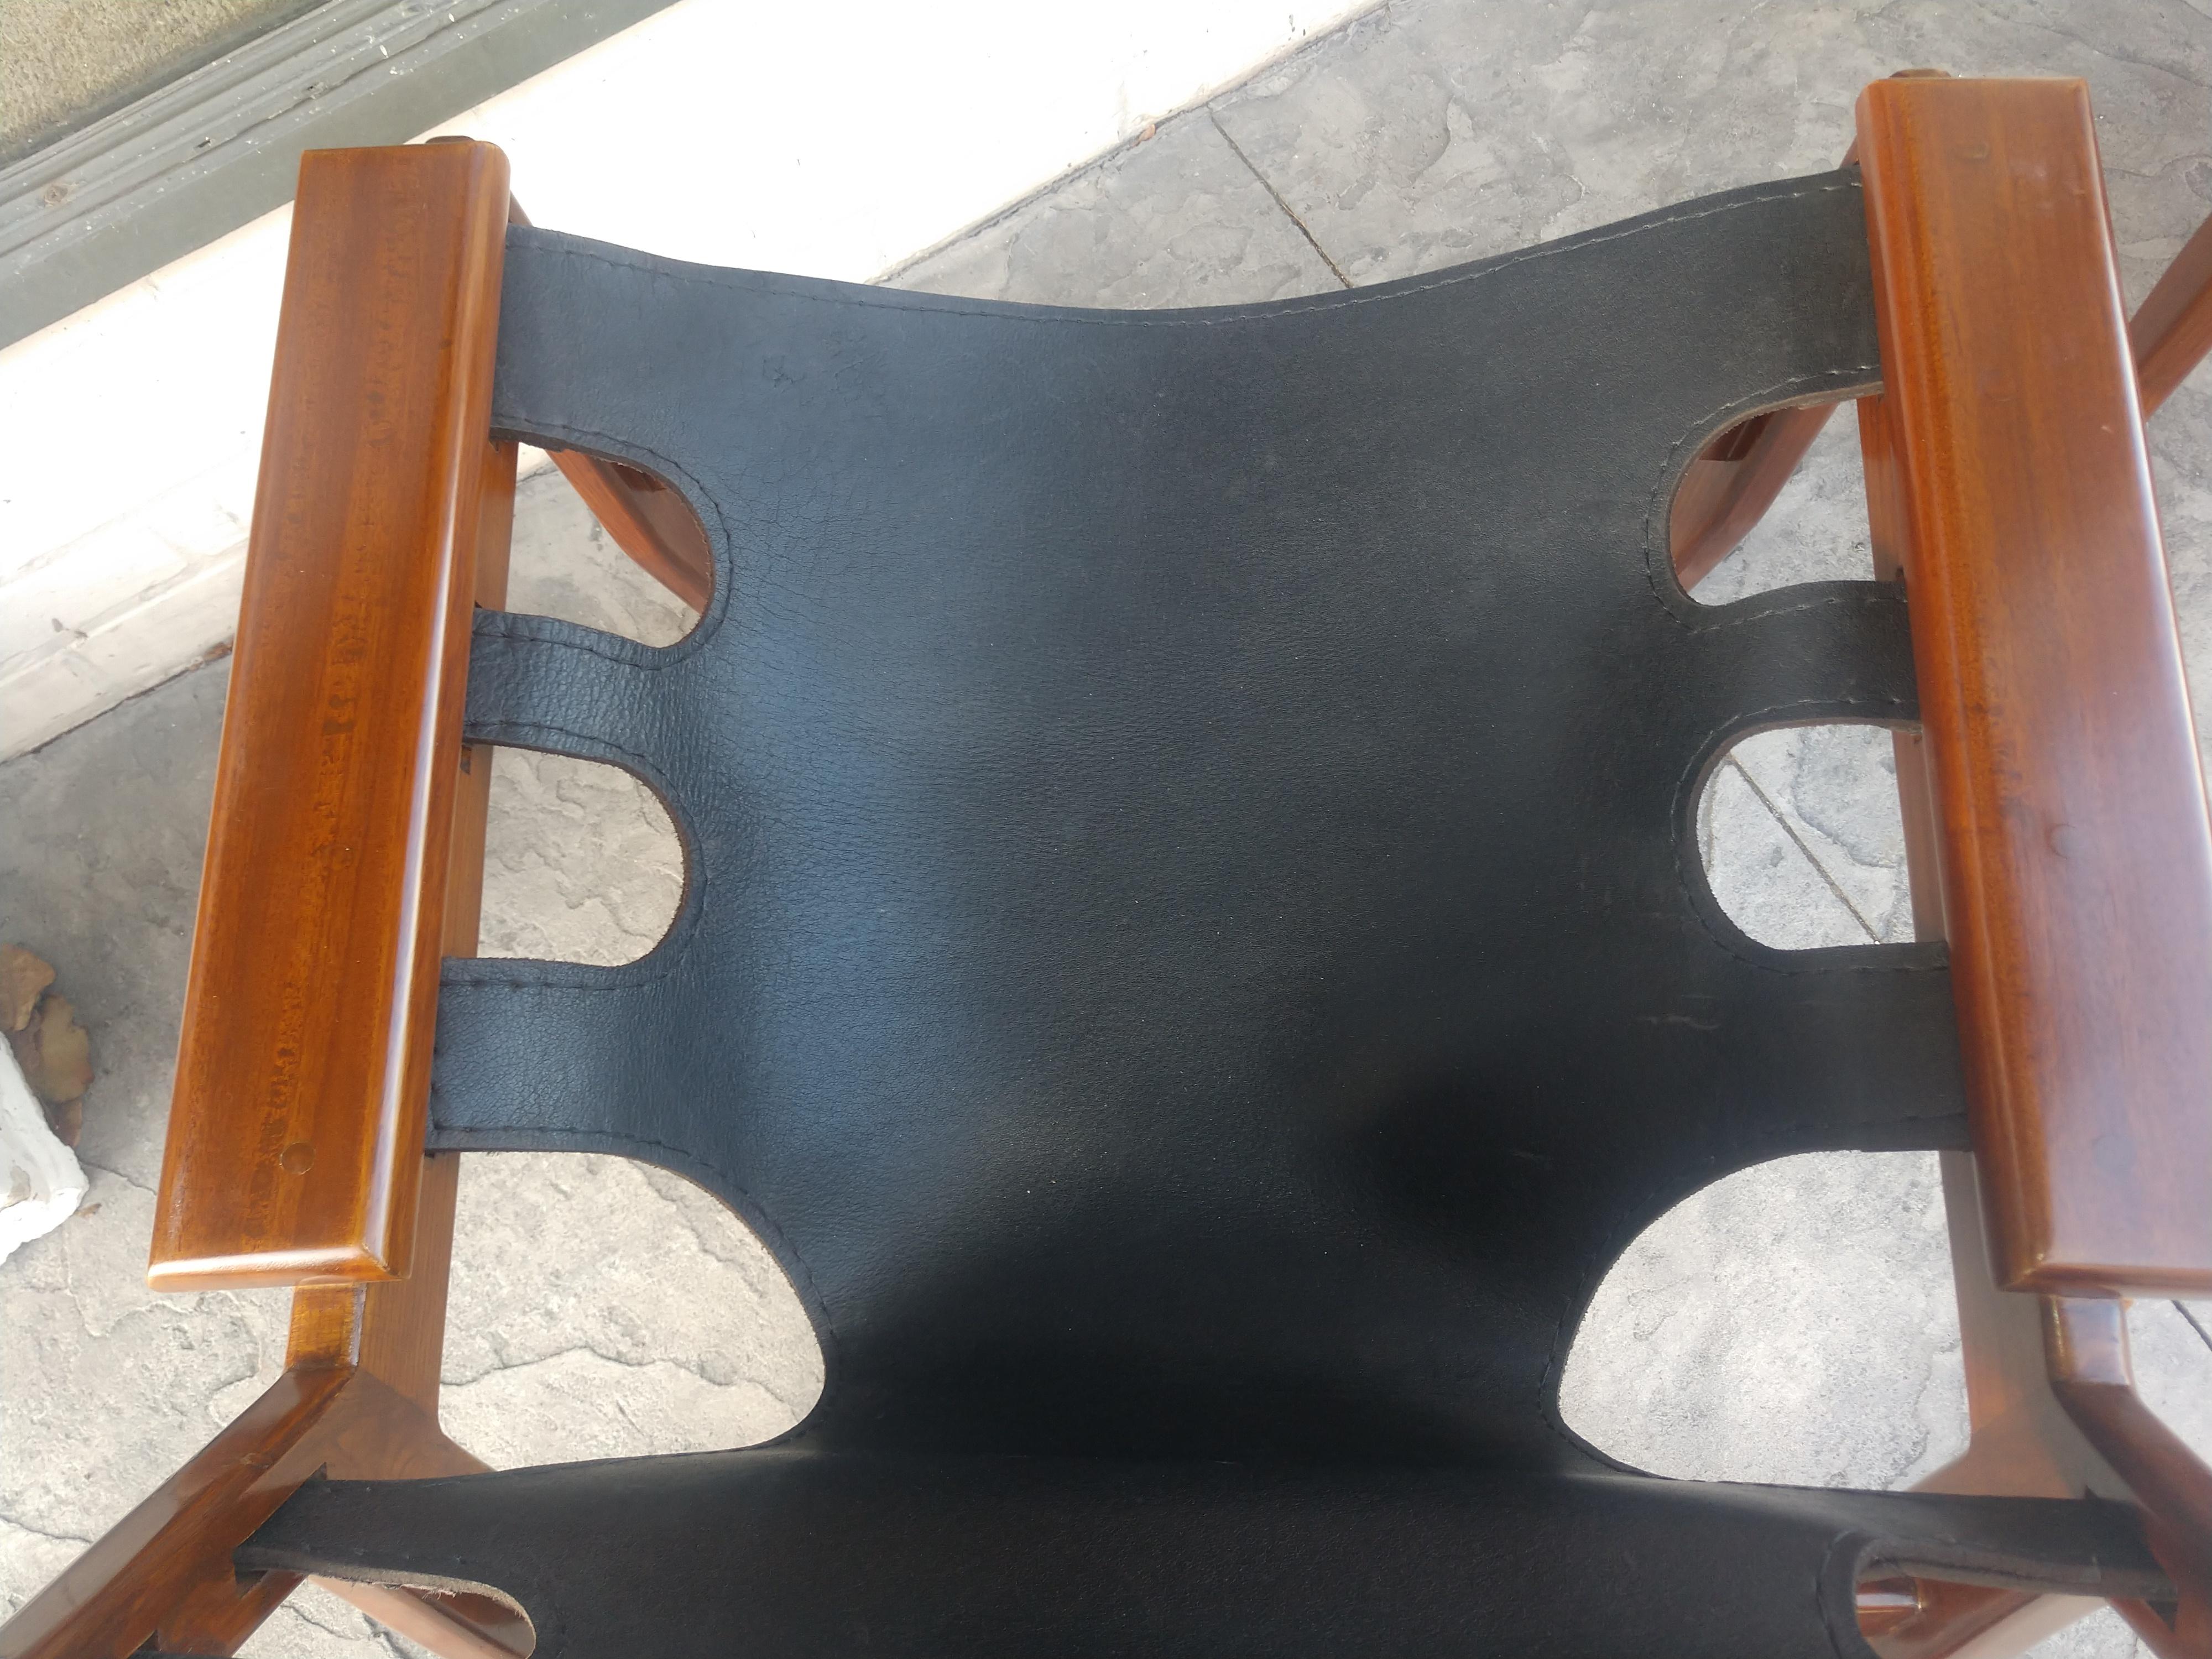 Simple and elegant pair of Mid-Century Modern sculptural leather lounge chairs with Mahogany frames by Sergio Rodrigues. In excellent vintage condition with minimal wear. Sold as a pair.